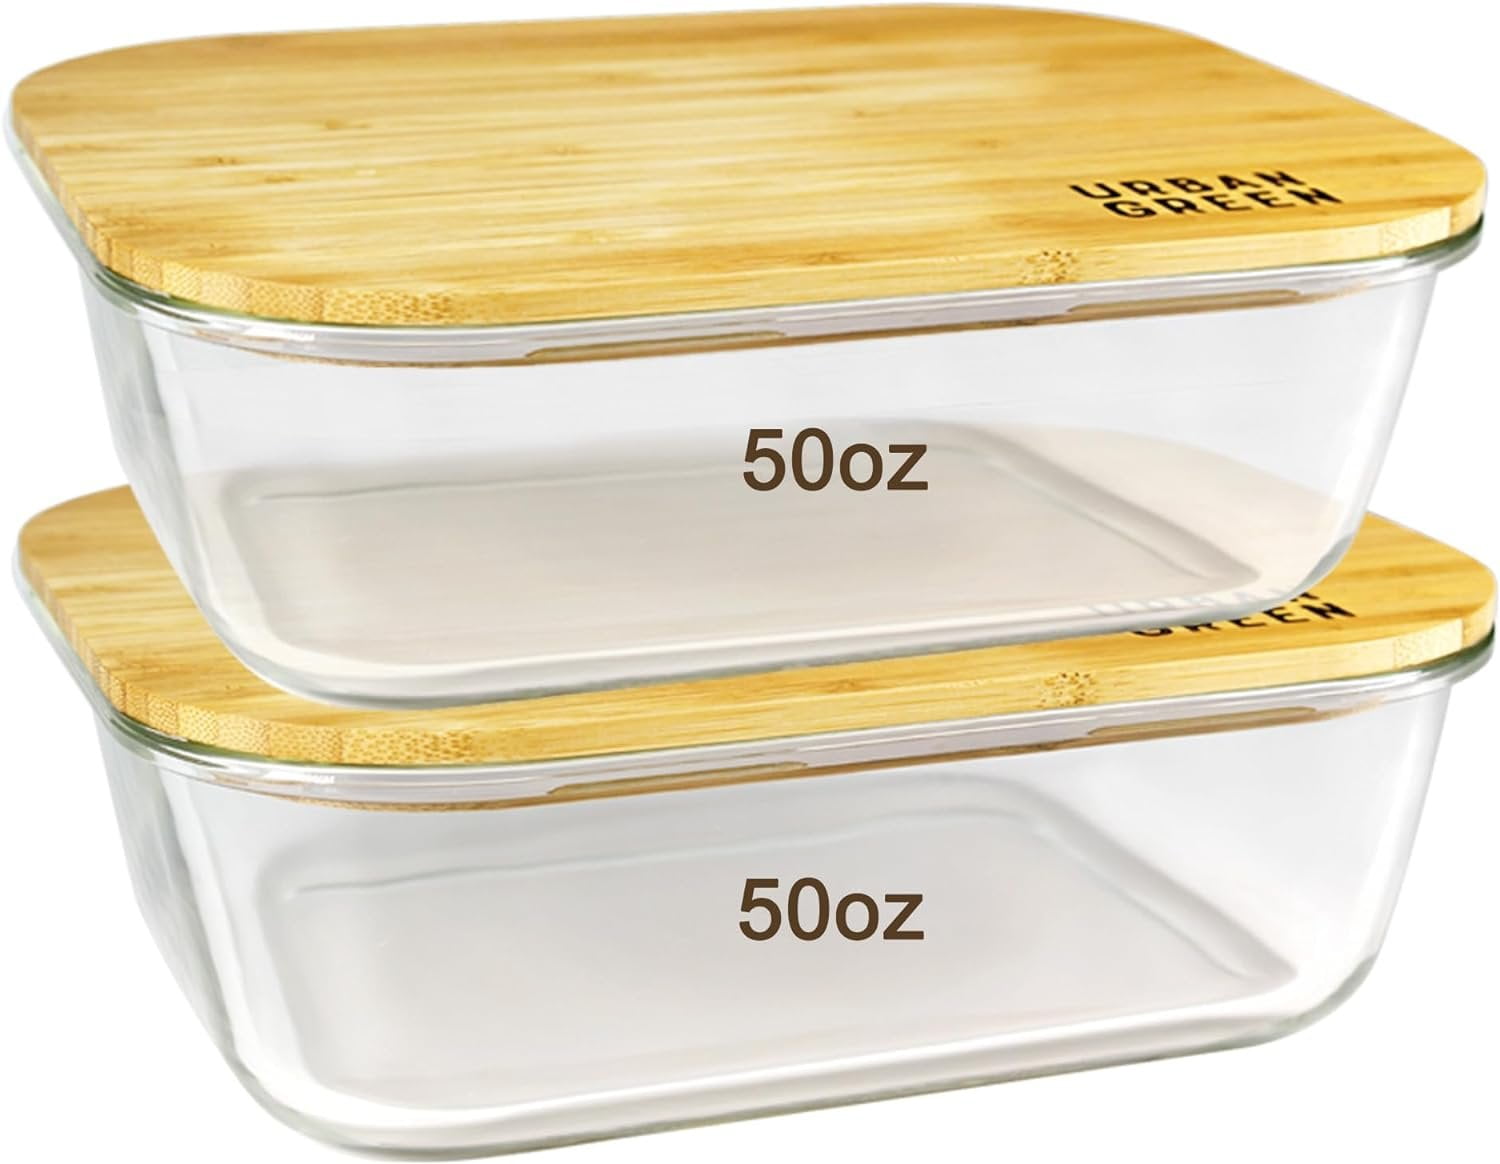 Rectangular Glass Food Containers with Bamboo Lids 2pk